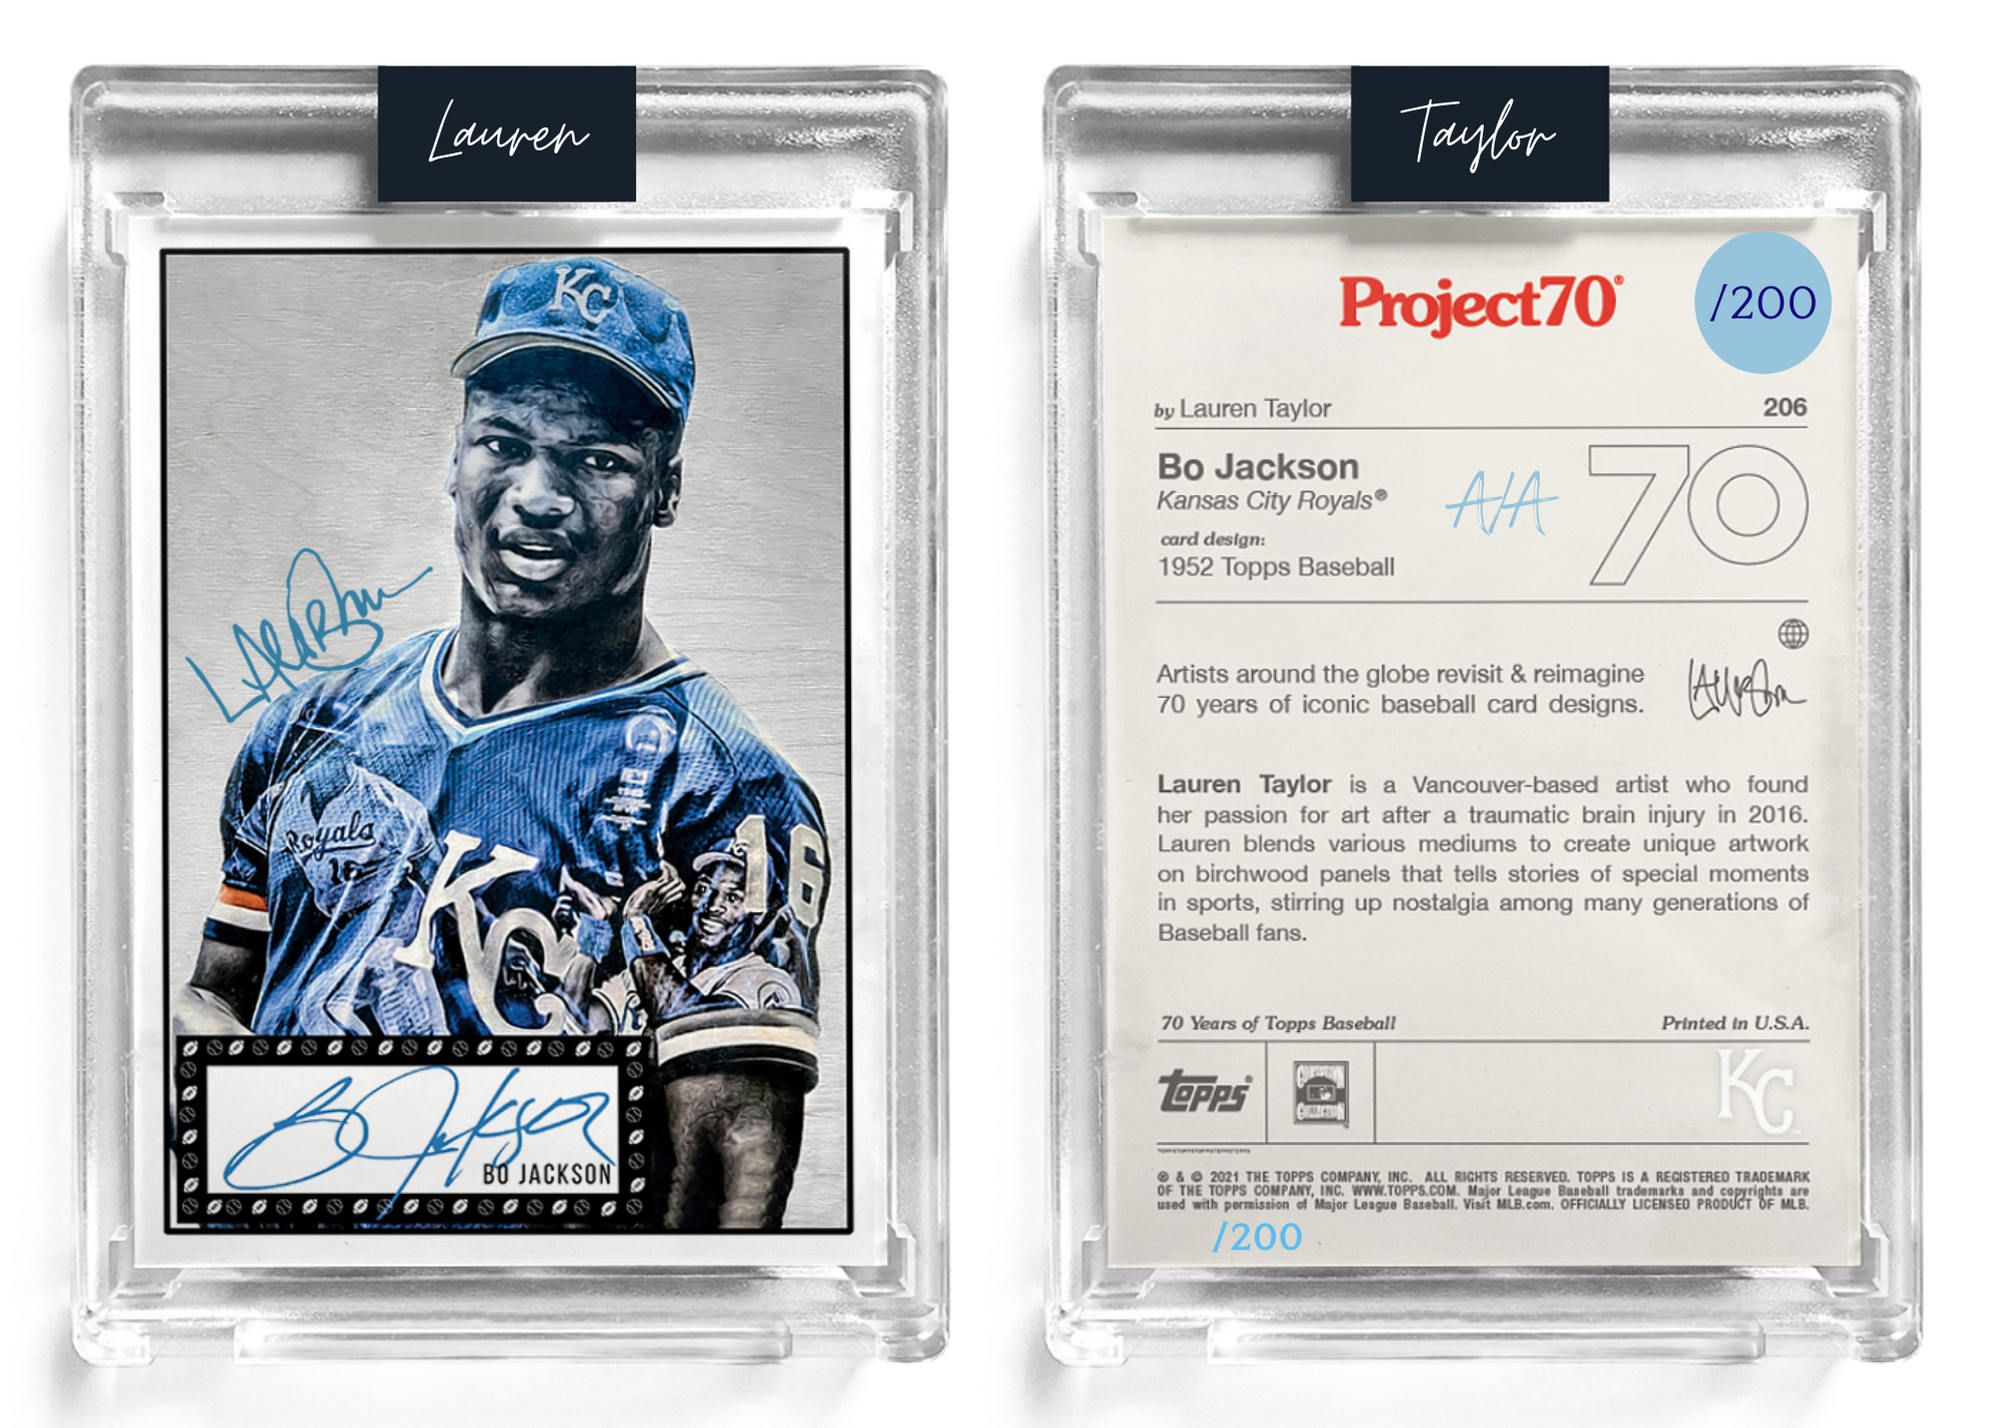 200 Orange Artist Signature - Topps Project 70 130pt card #422 by Lau